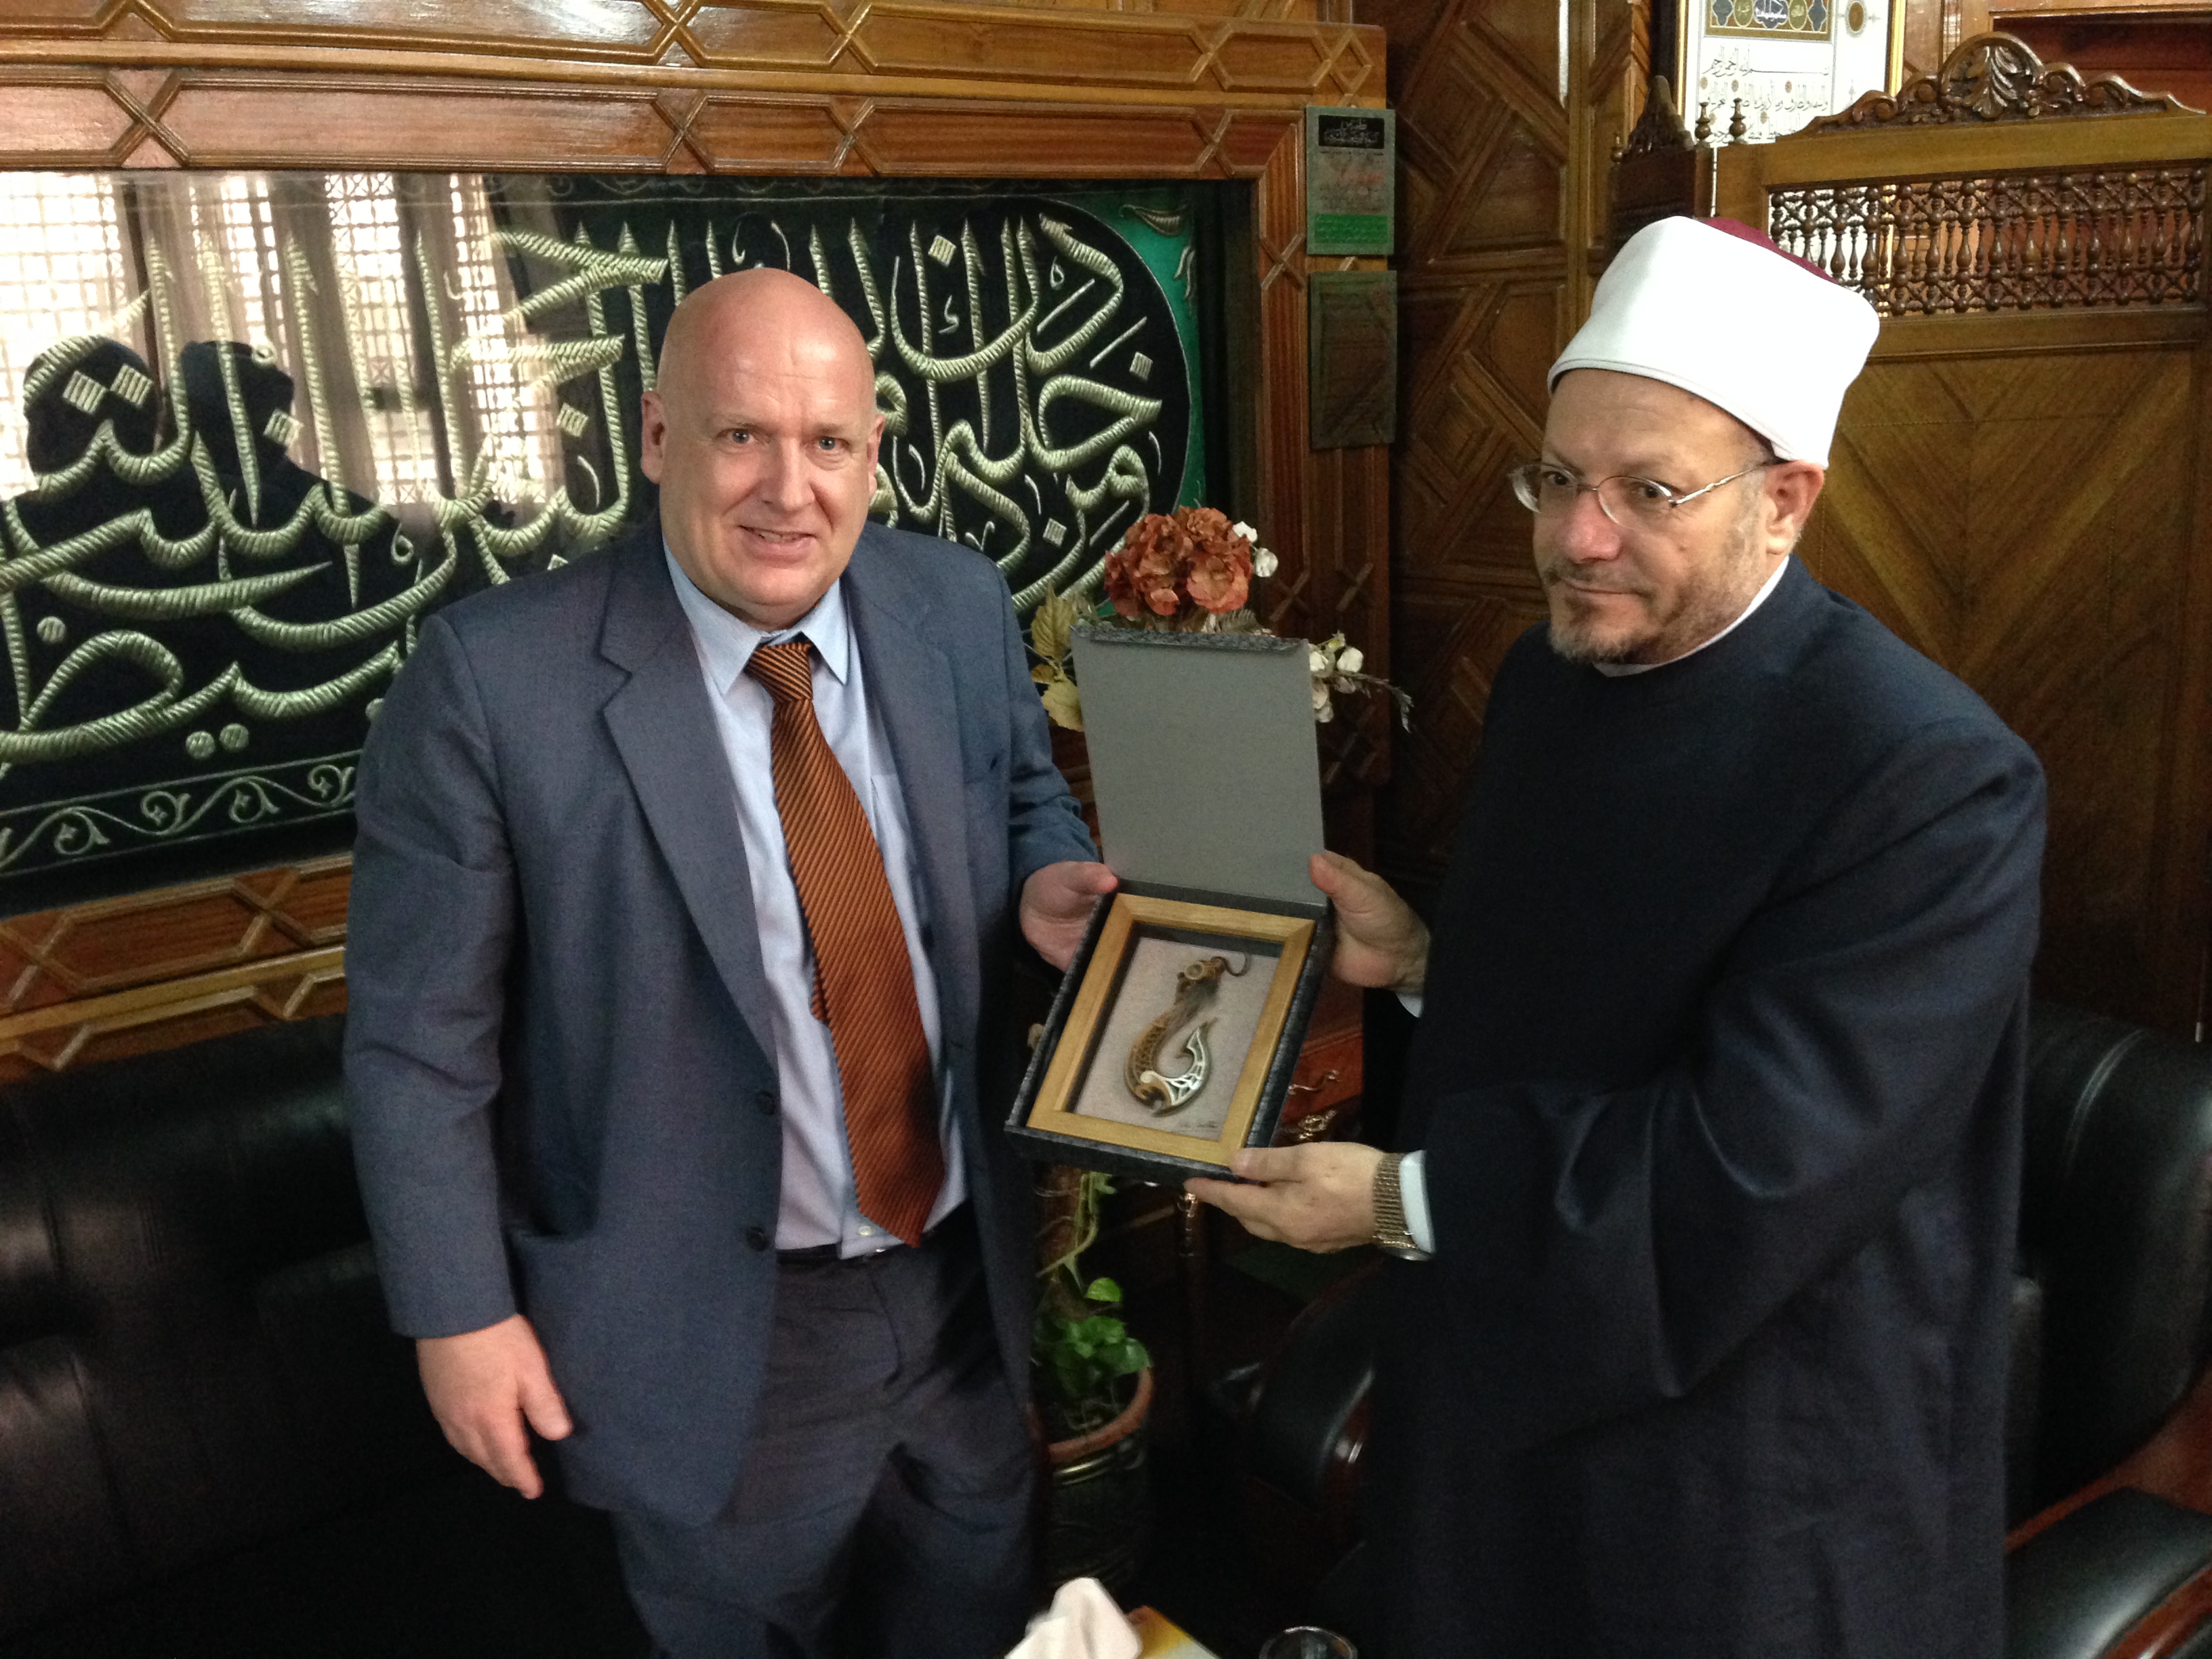 The ambassador of New Zealand praised the efforts exerted by Dar Al-Iftaa in  confronting terrorism